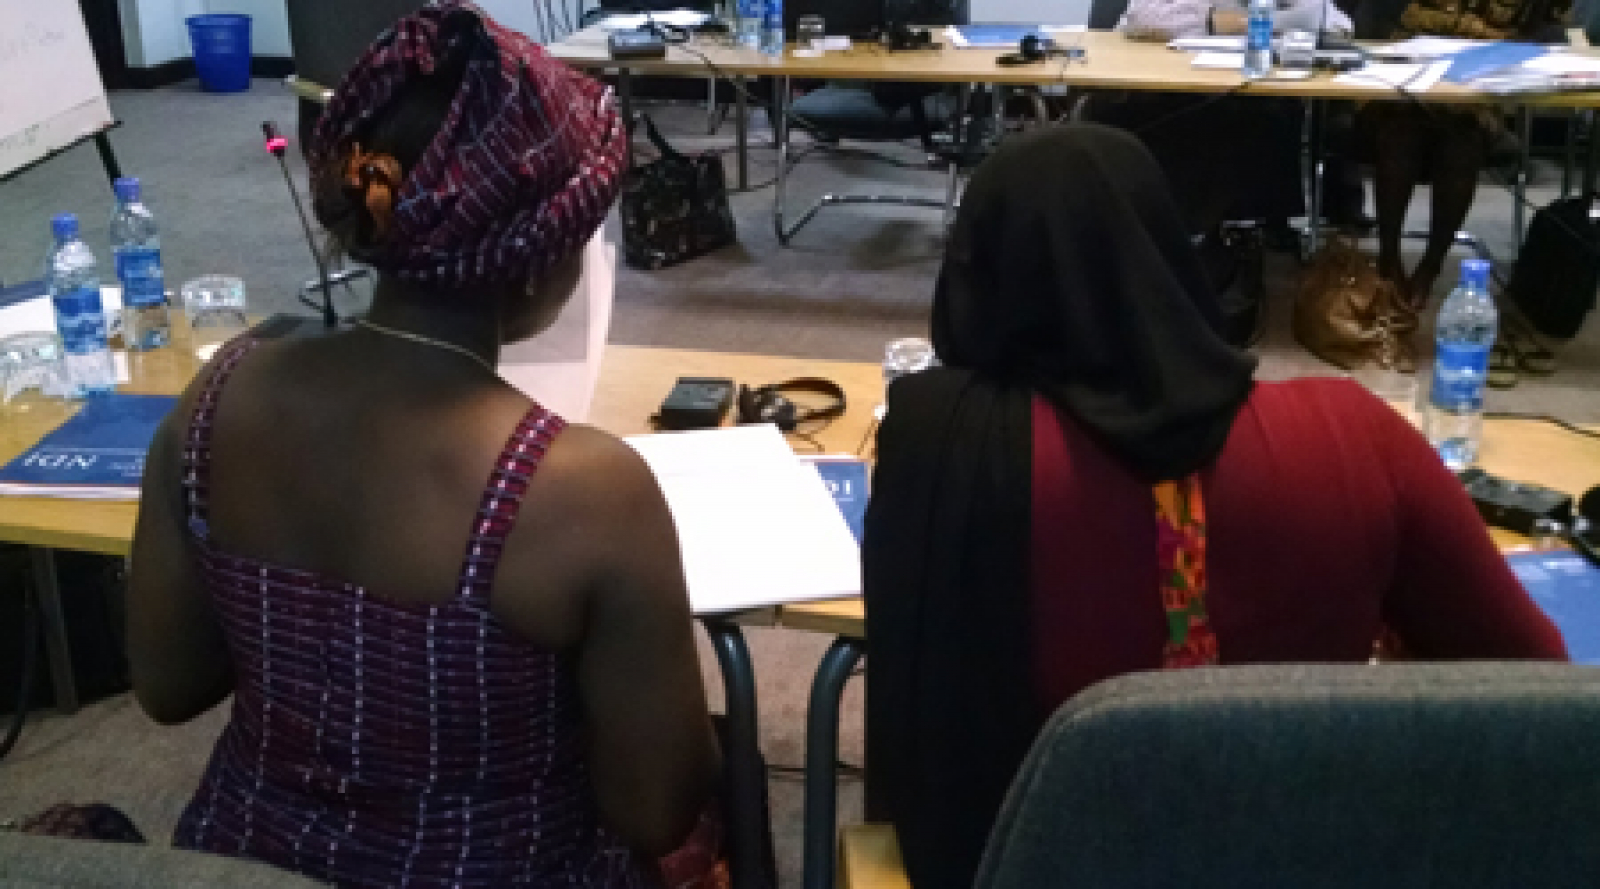 Women from Sudan and South Sudan Act Together on Gender Issues